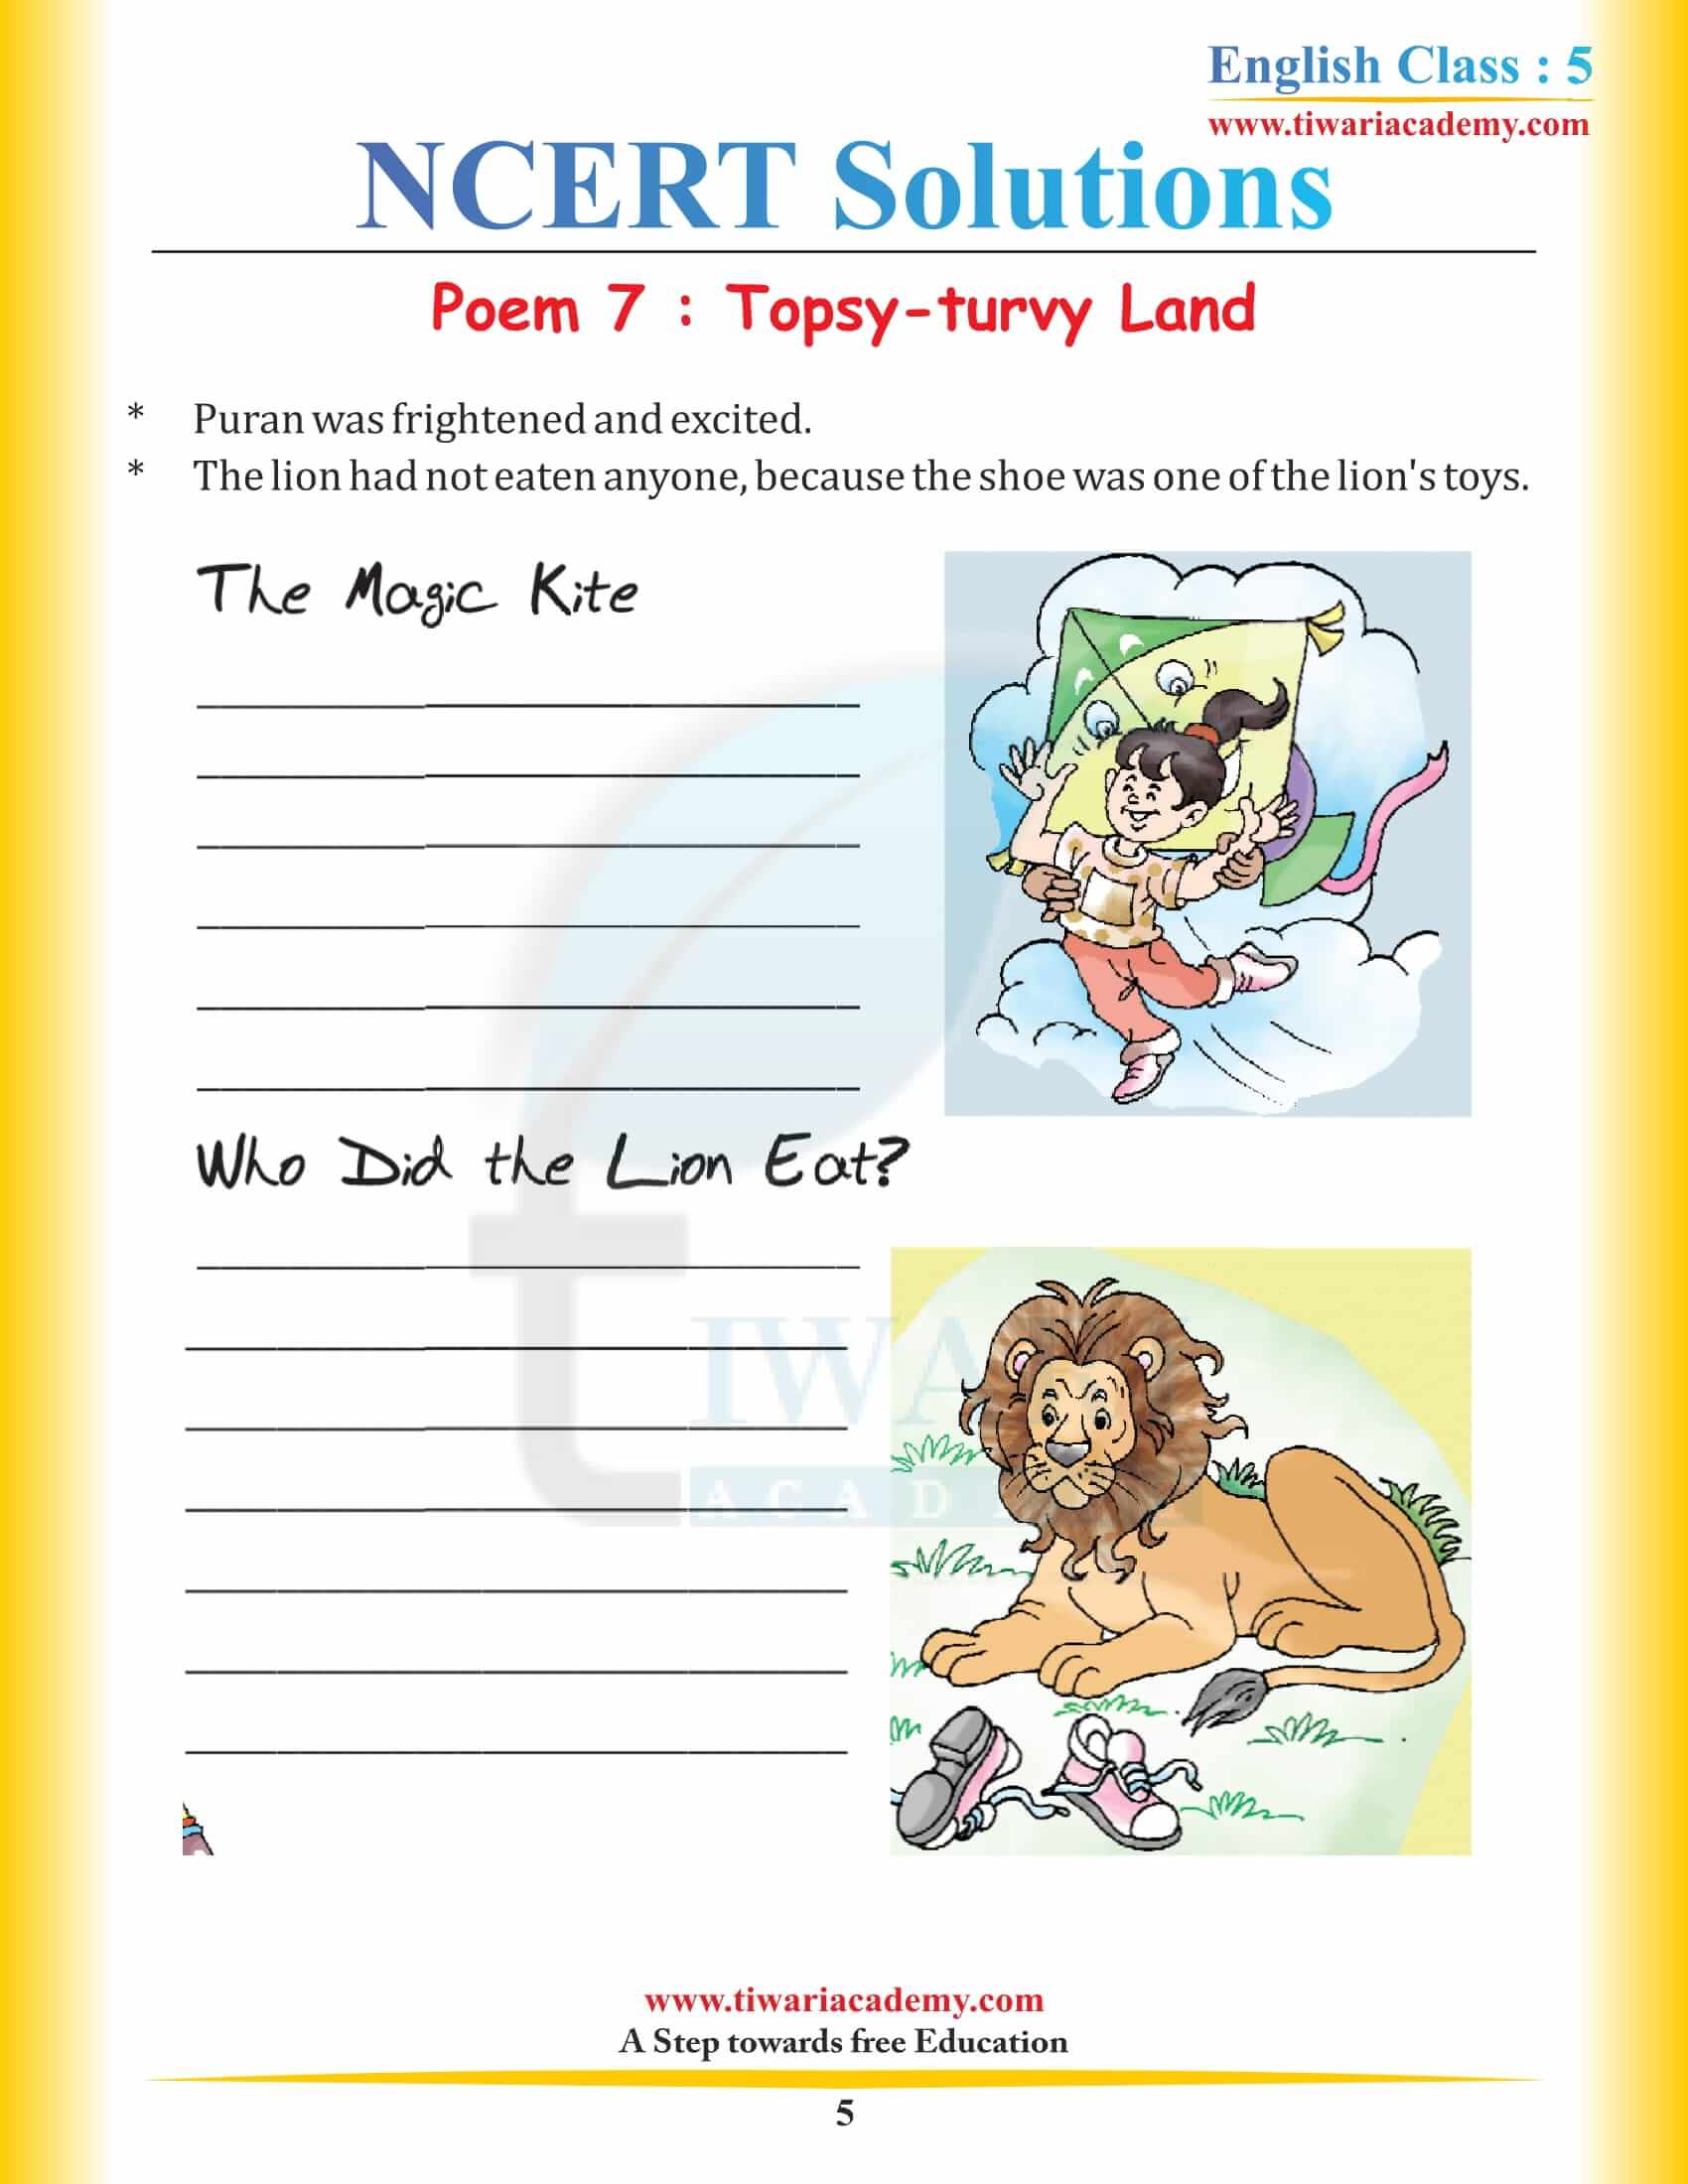 NCERT Solutions for Class 5 English Chapter 7 Topsy-turvy Land free download